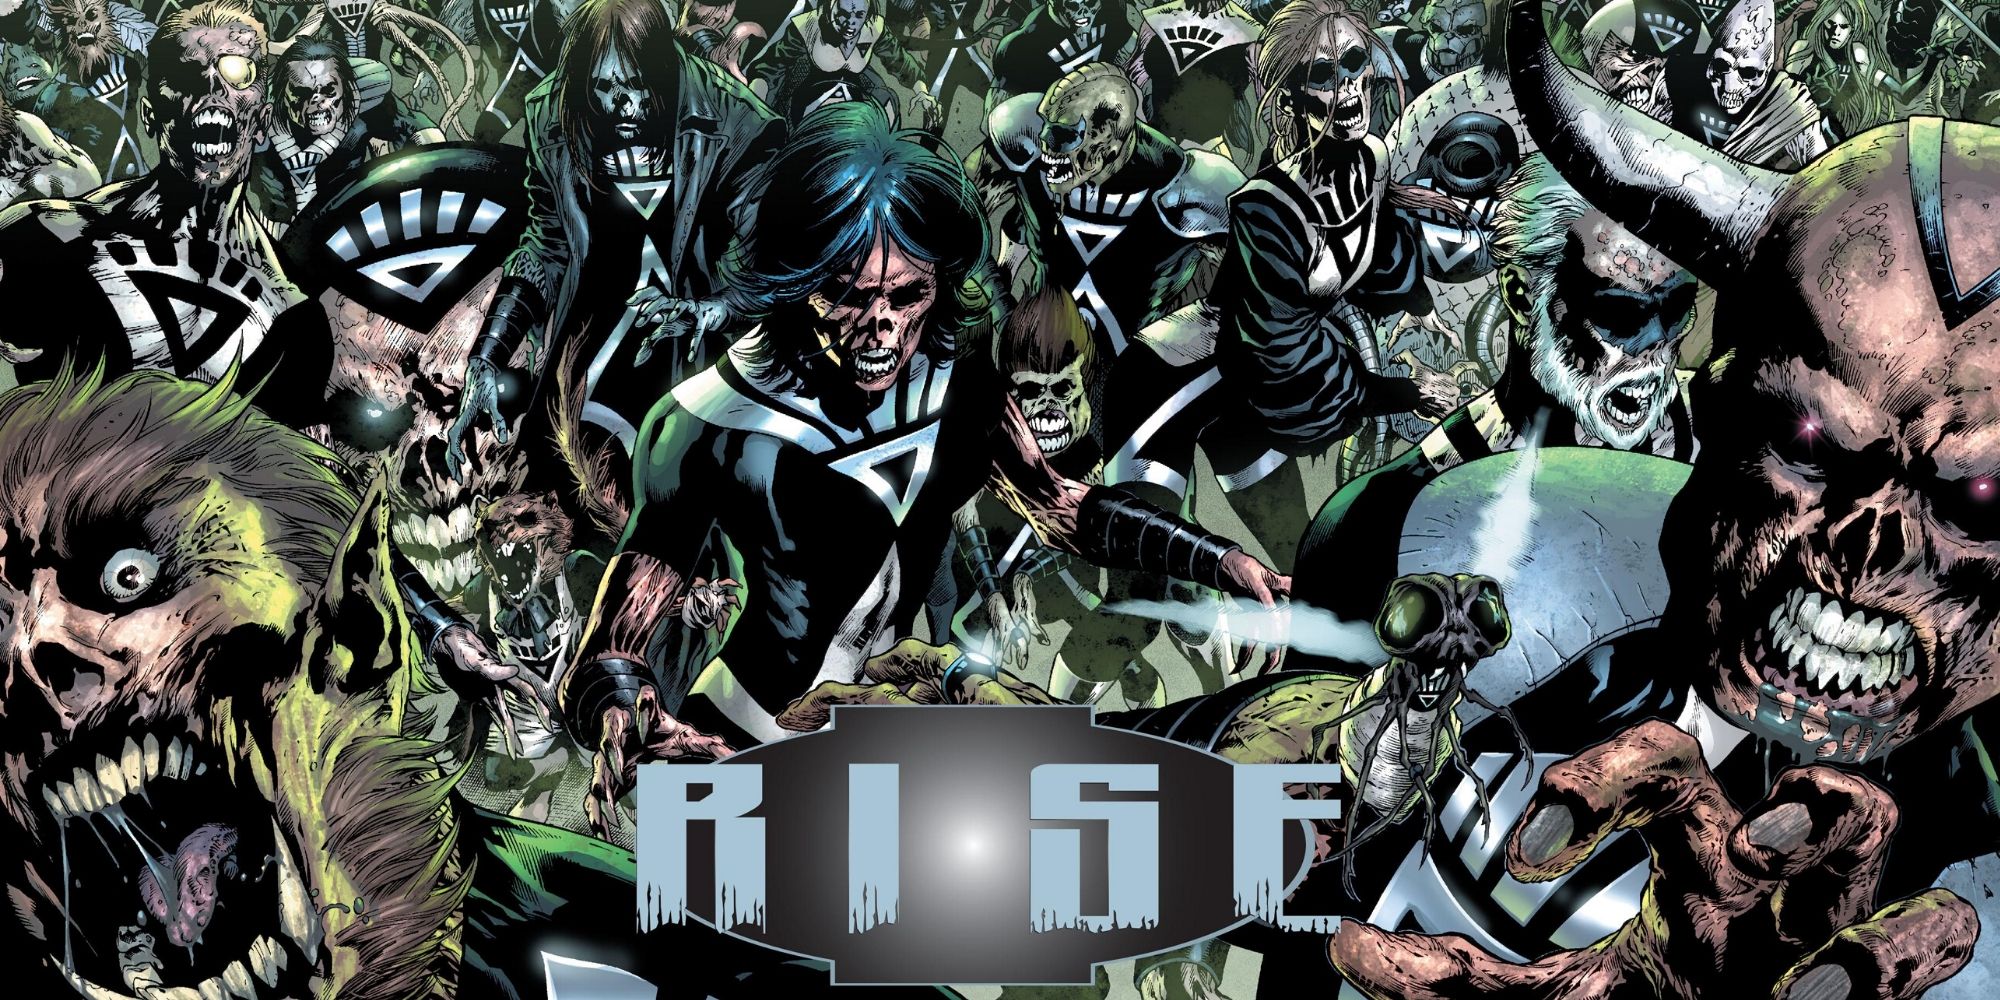 Blackest Night story arc art with the zombies rising up